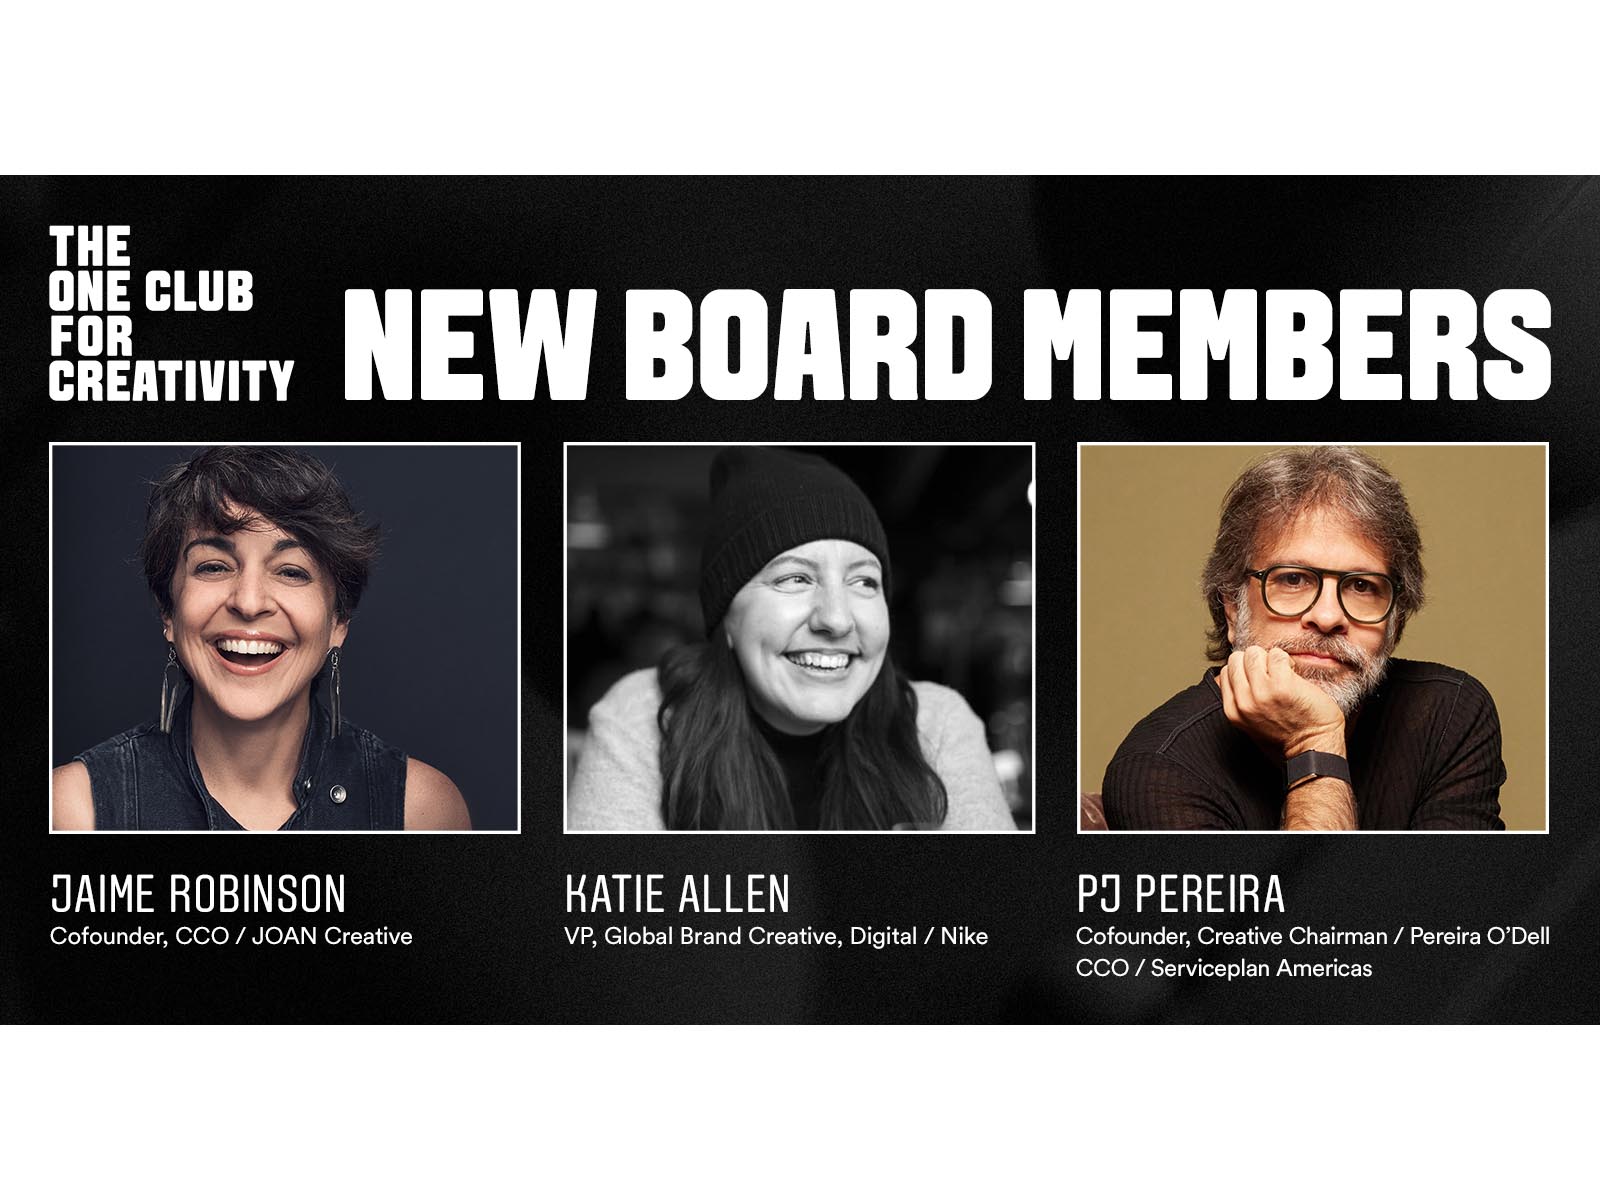 Three creative leaders join The One Club Board of Directors